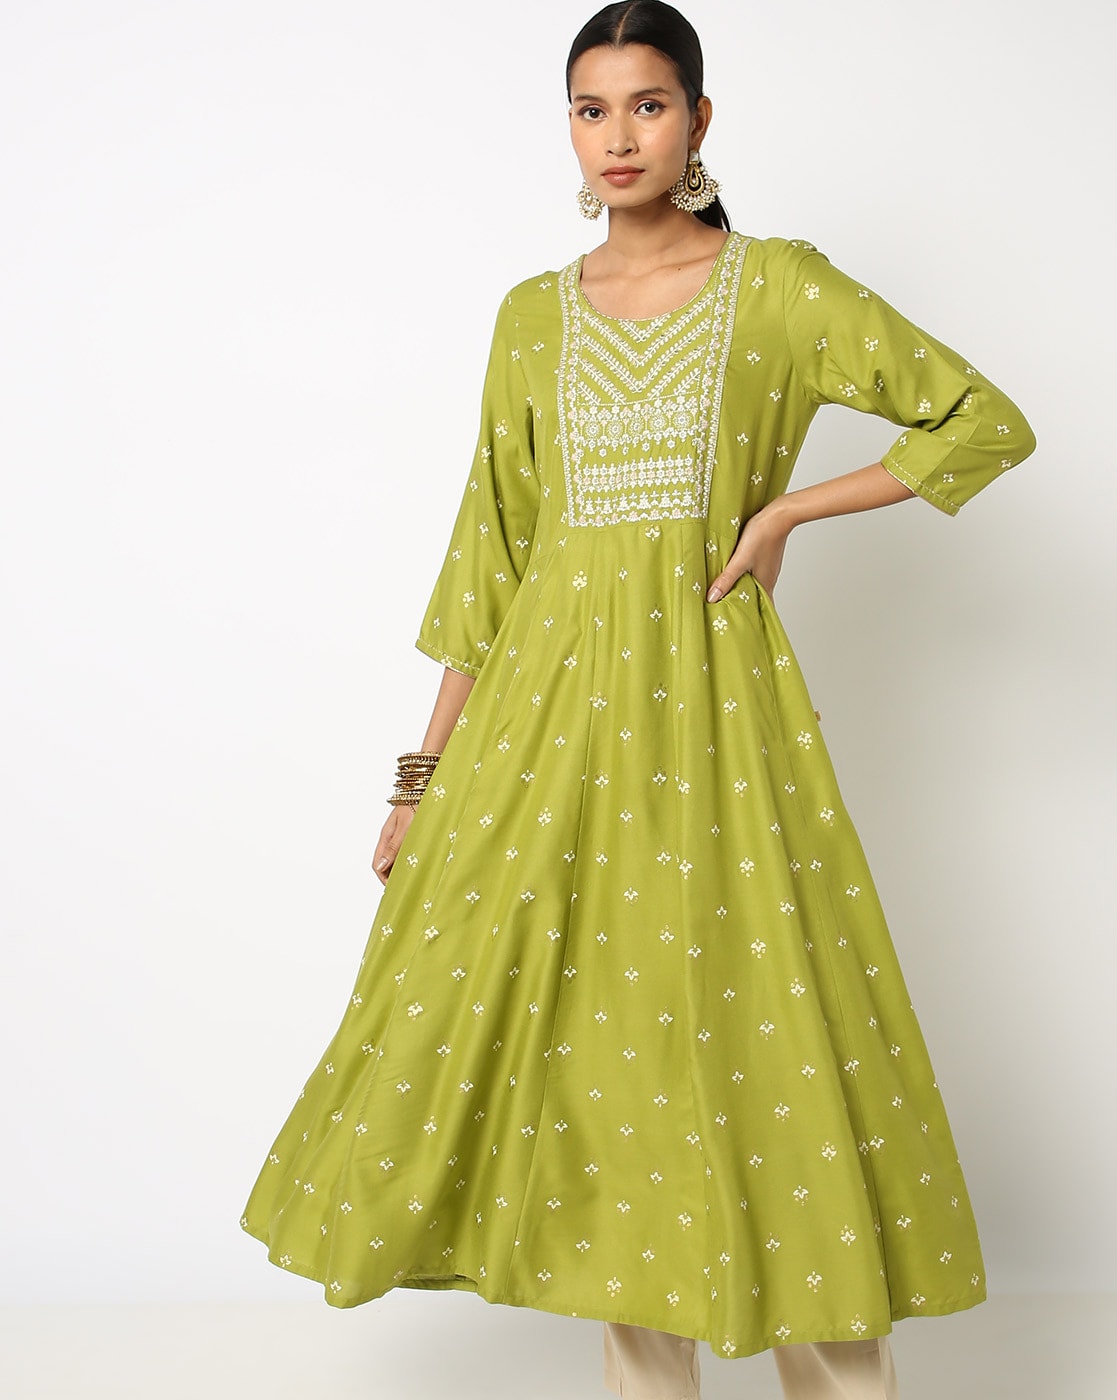 3/4 Sleeve Georgette Anarkali Chikan Kurti, S To 5XL at Rs 749 in Surat